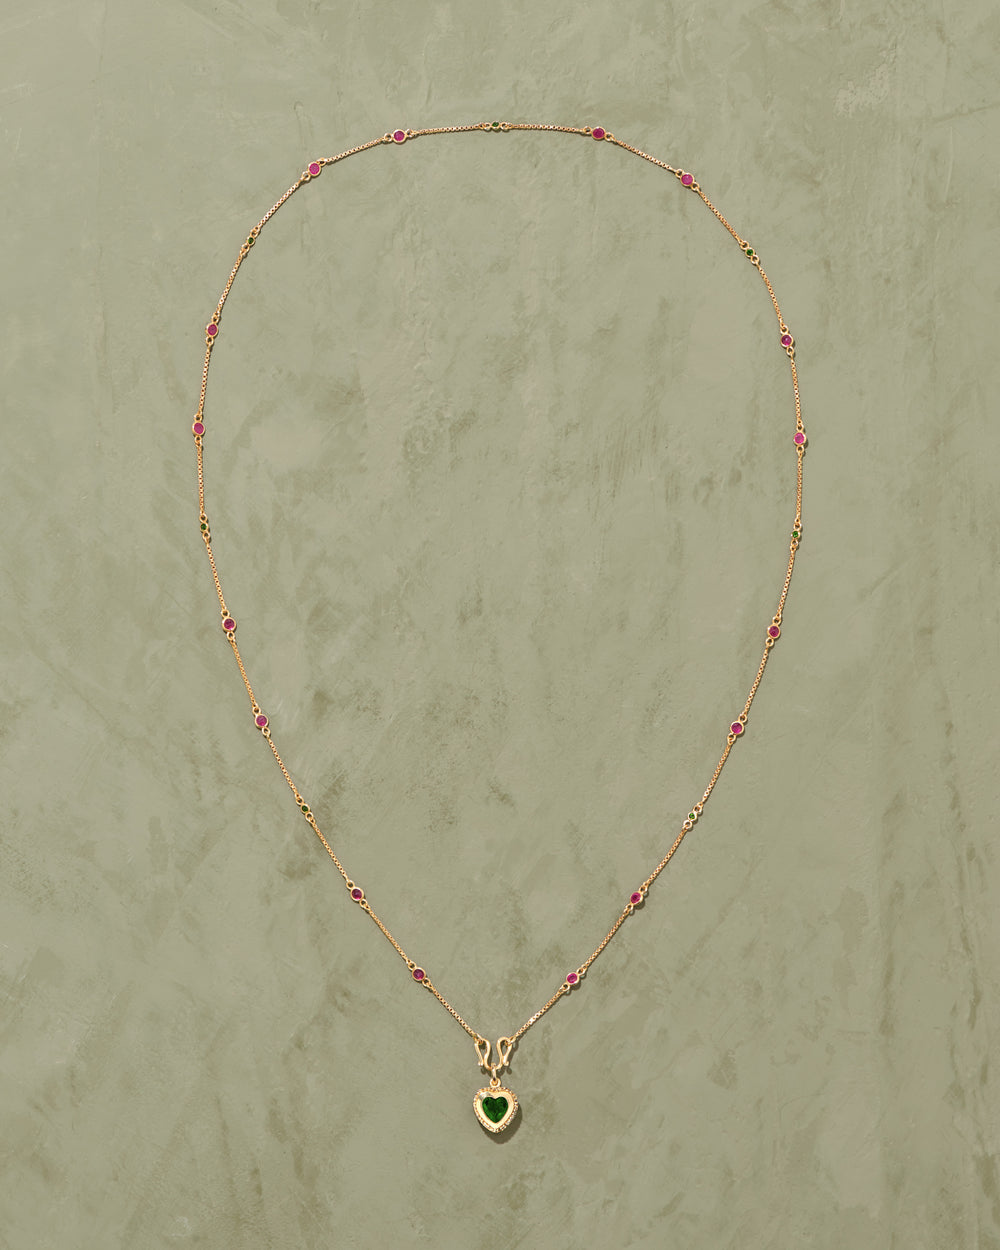 Gini diopside necklace